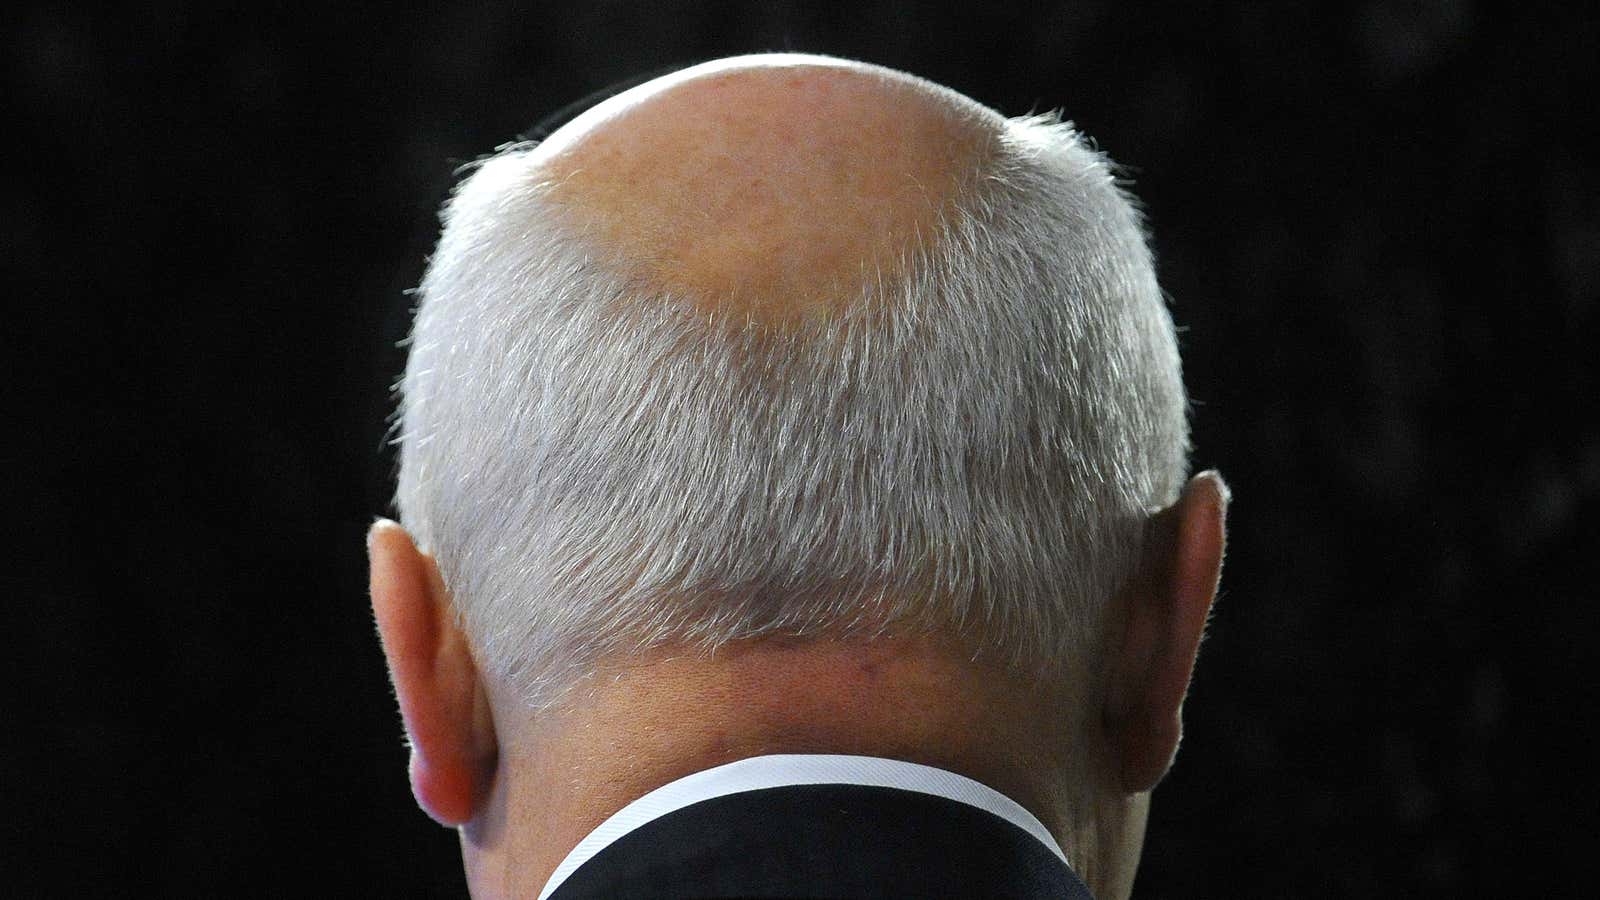 Is the end of baldness in sight?